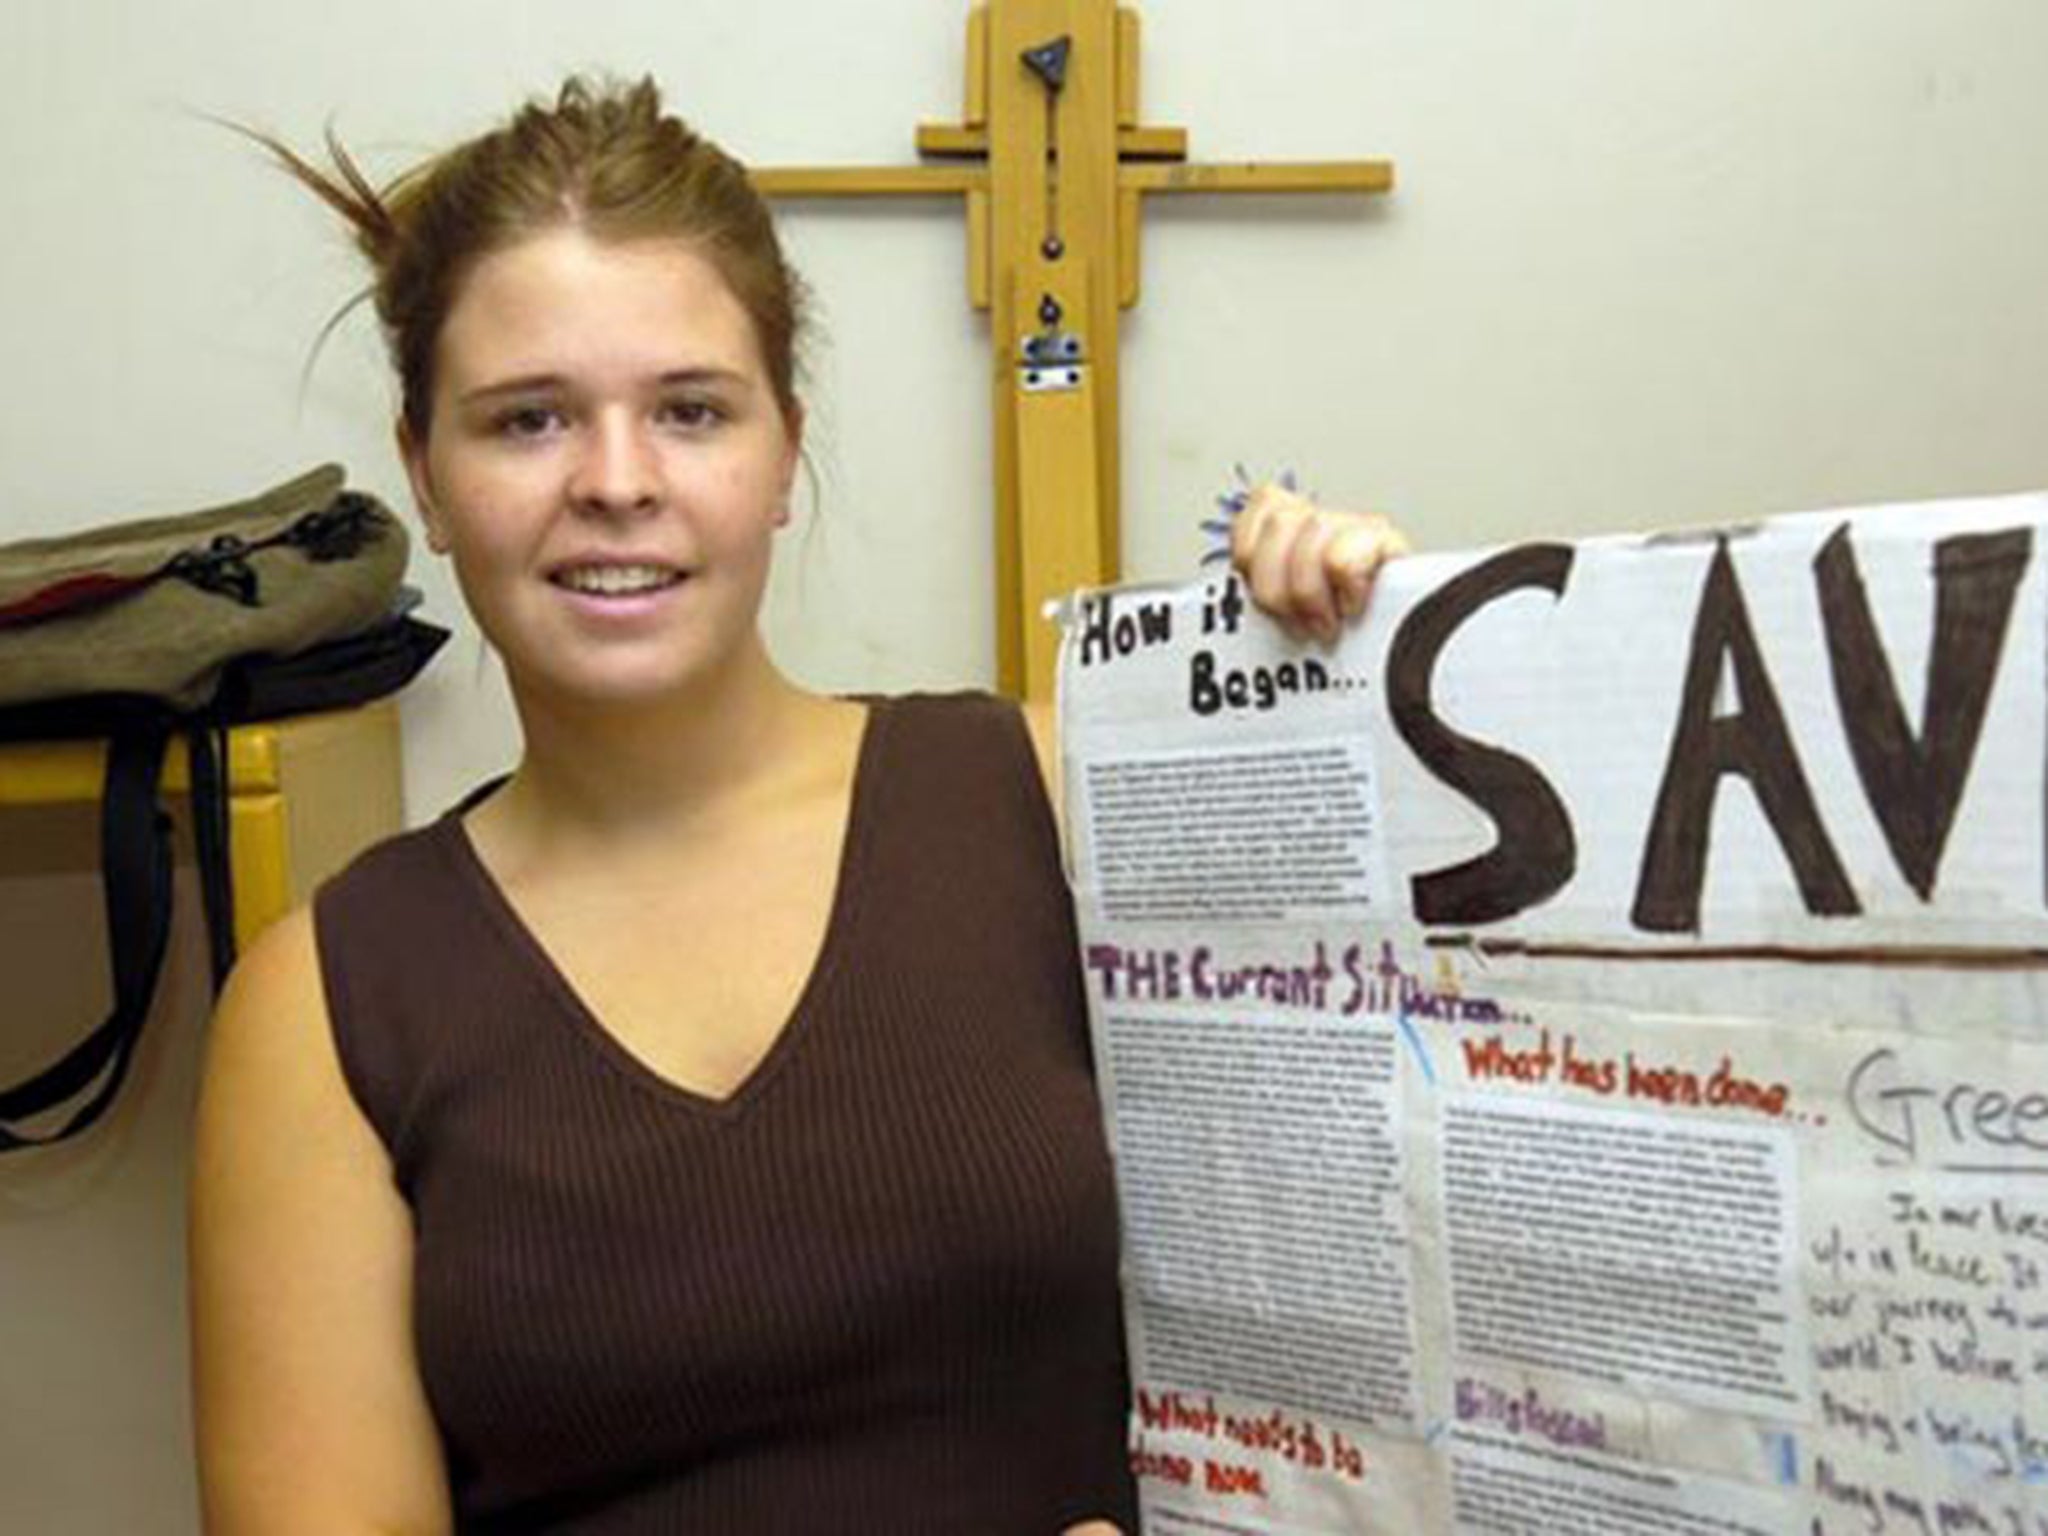 The 25-year-old humanitarian worker went missing in 2013